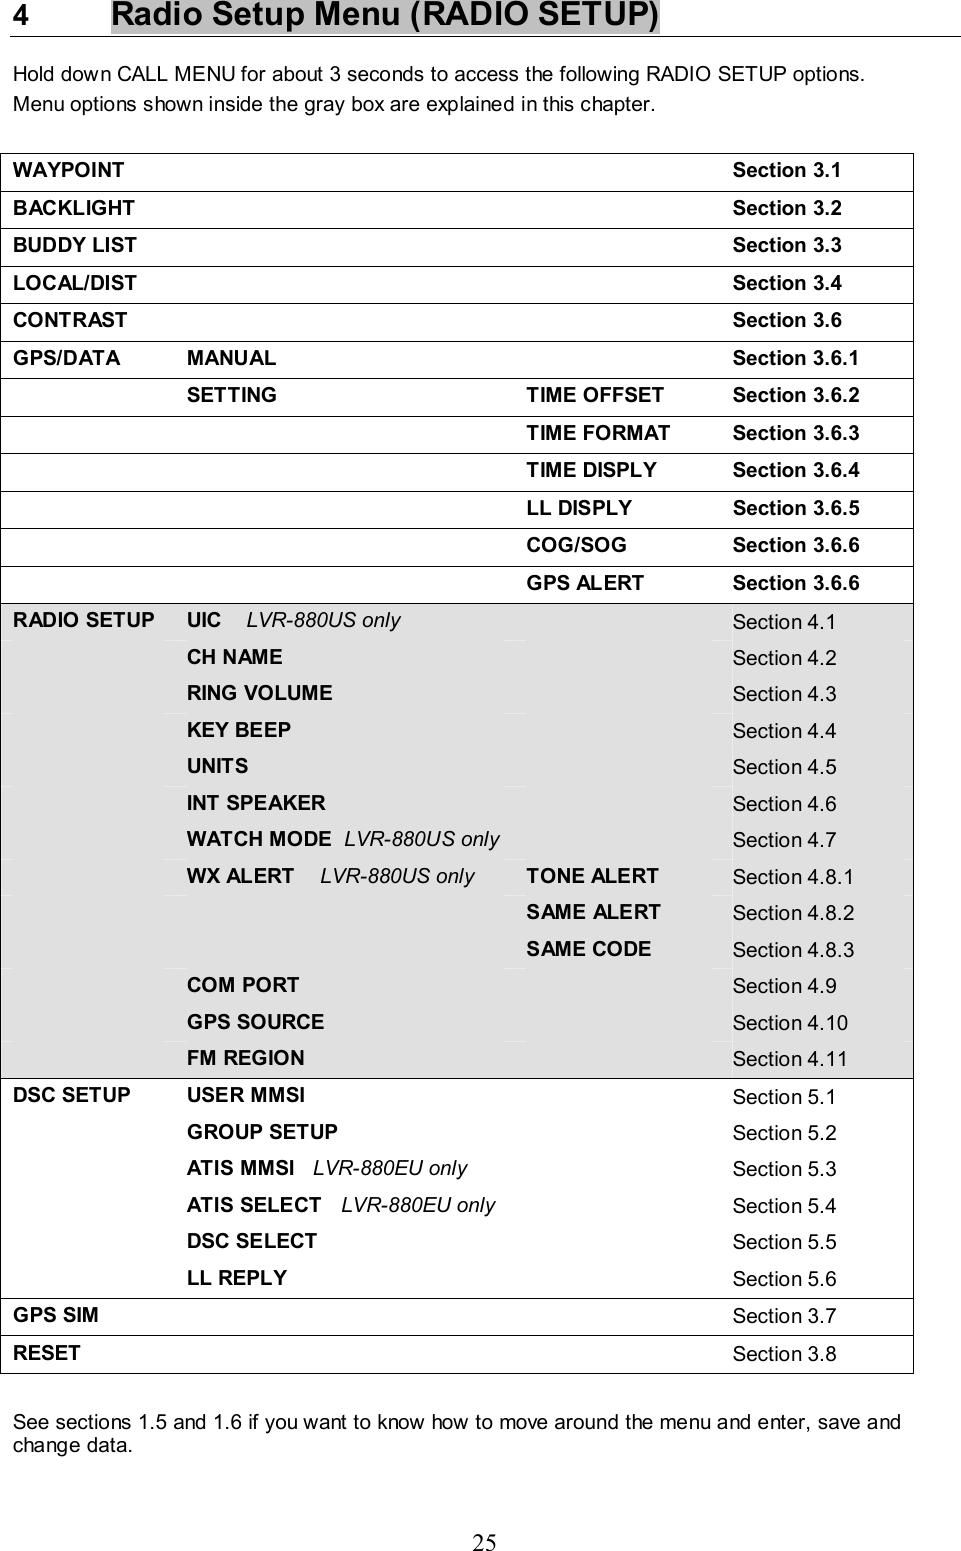 25 4   Radio Setup Menu (RADIO SETUP) Hold down CALL MENU for about 3 seconds to access the following RADIO SETUP options.  Menu options shown inside the gray box are explained in this chapter.  WAYPOINT   Section 3.1 BACKLIGHT    Section 3.2 BUDDY LIST   Section 3.3 LOCAL/DIST    Section 3.4 CONTRAST   Section 3.6 GPS/DATA MANUAL  Section 3.6.1  SETTING TIME OFFSET Section 3.6.2   TIME FORMAT Section 3.6.3   TIME DISPLY Section 3.6.4    LL DISPLY  Section 3.6.5   COG/SOG Section 3.6.6    GPS ALERT  Section 3.6.6 RADIO SETUP  UIC    LVR-880US only    Section 4.1  CH NAME   Section 4.2  RING VOLUME   Section 4.3  KEY BEEP   Section 4.4  UNITS   Section 4.5  INT SPEAKER   Section 4.6  WATCH MODE  LVR-880US only    Section 4.7  WX ALERT    LVR-880US only TONE ALERT  Section 4.8.1     SAME ALERT  Section 4.8.2     SAME CODE  Section 4.8.3  COM PORT   Section 4.9  GPS SOURCE   Section 4.10  FM REGION   Section 4.11 DSC SETUP  USER MMSI    Section 5.1  GROUP SETUP    Section 5.2   ATIS MMSI   LVR-880EU only   Section 5.3   ATIS SELECT   LVR-880EU only   Section 5.4  DSC SELECT  Section 5.5  LL REPLY    Section 5.6 GPS SIM    Section 3.7 RESET    Section 3.8  See sections 1.5 and 1.6 if you want to know how to move around the menu and enter, save and change data.    